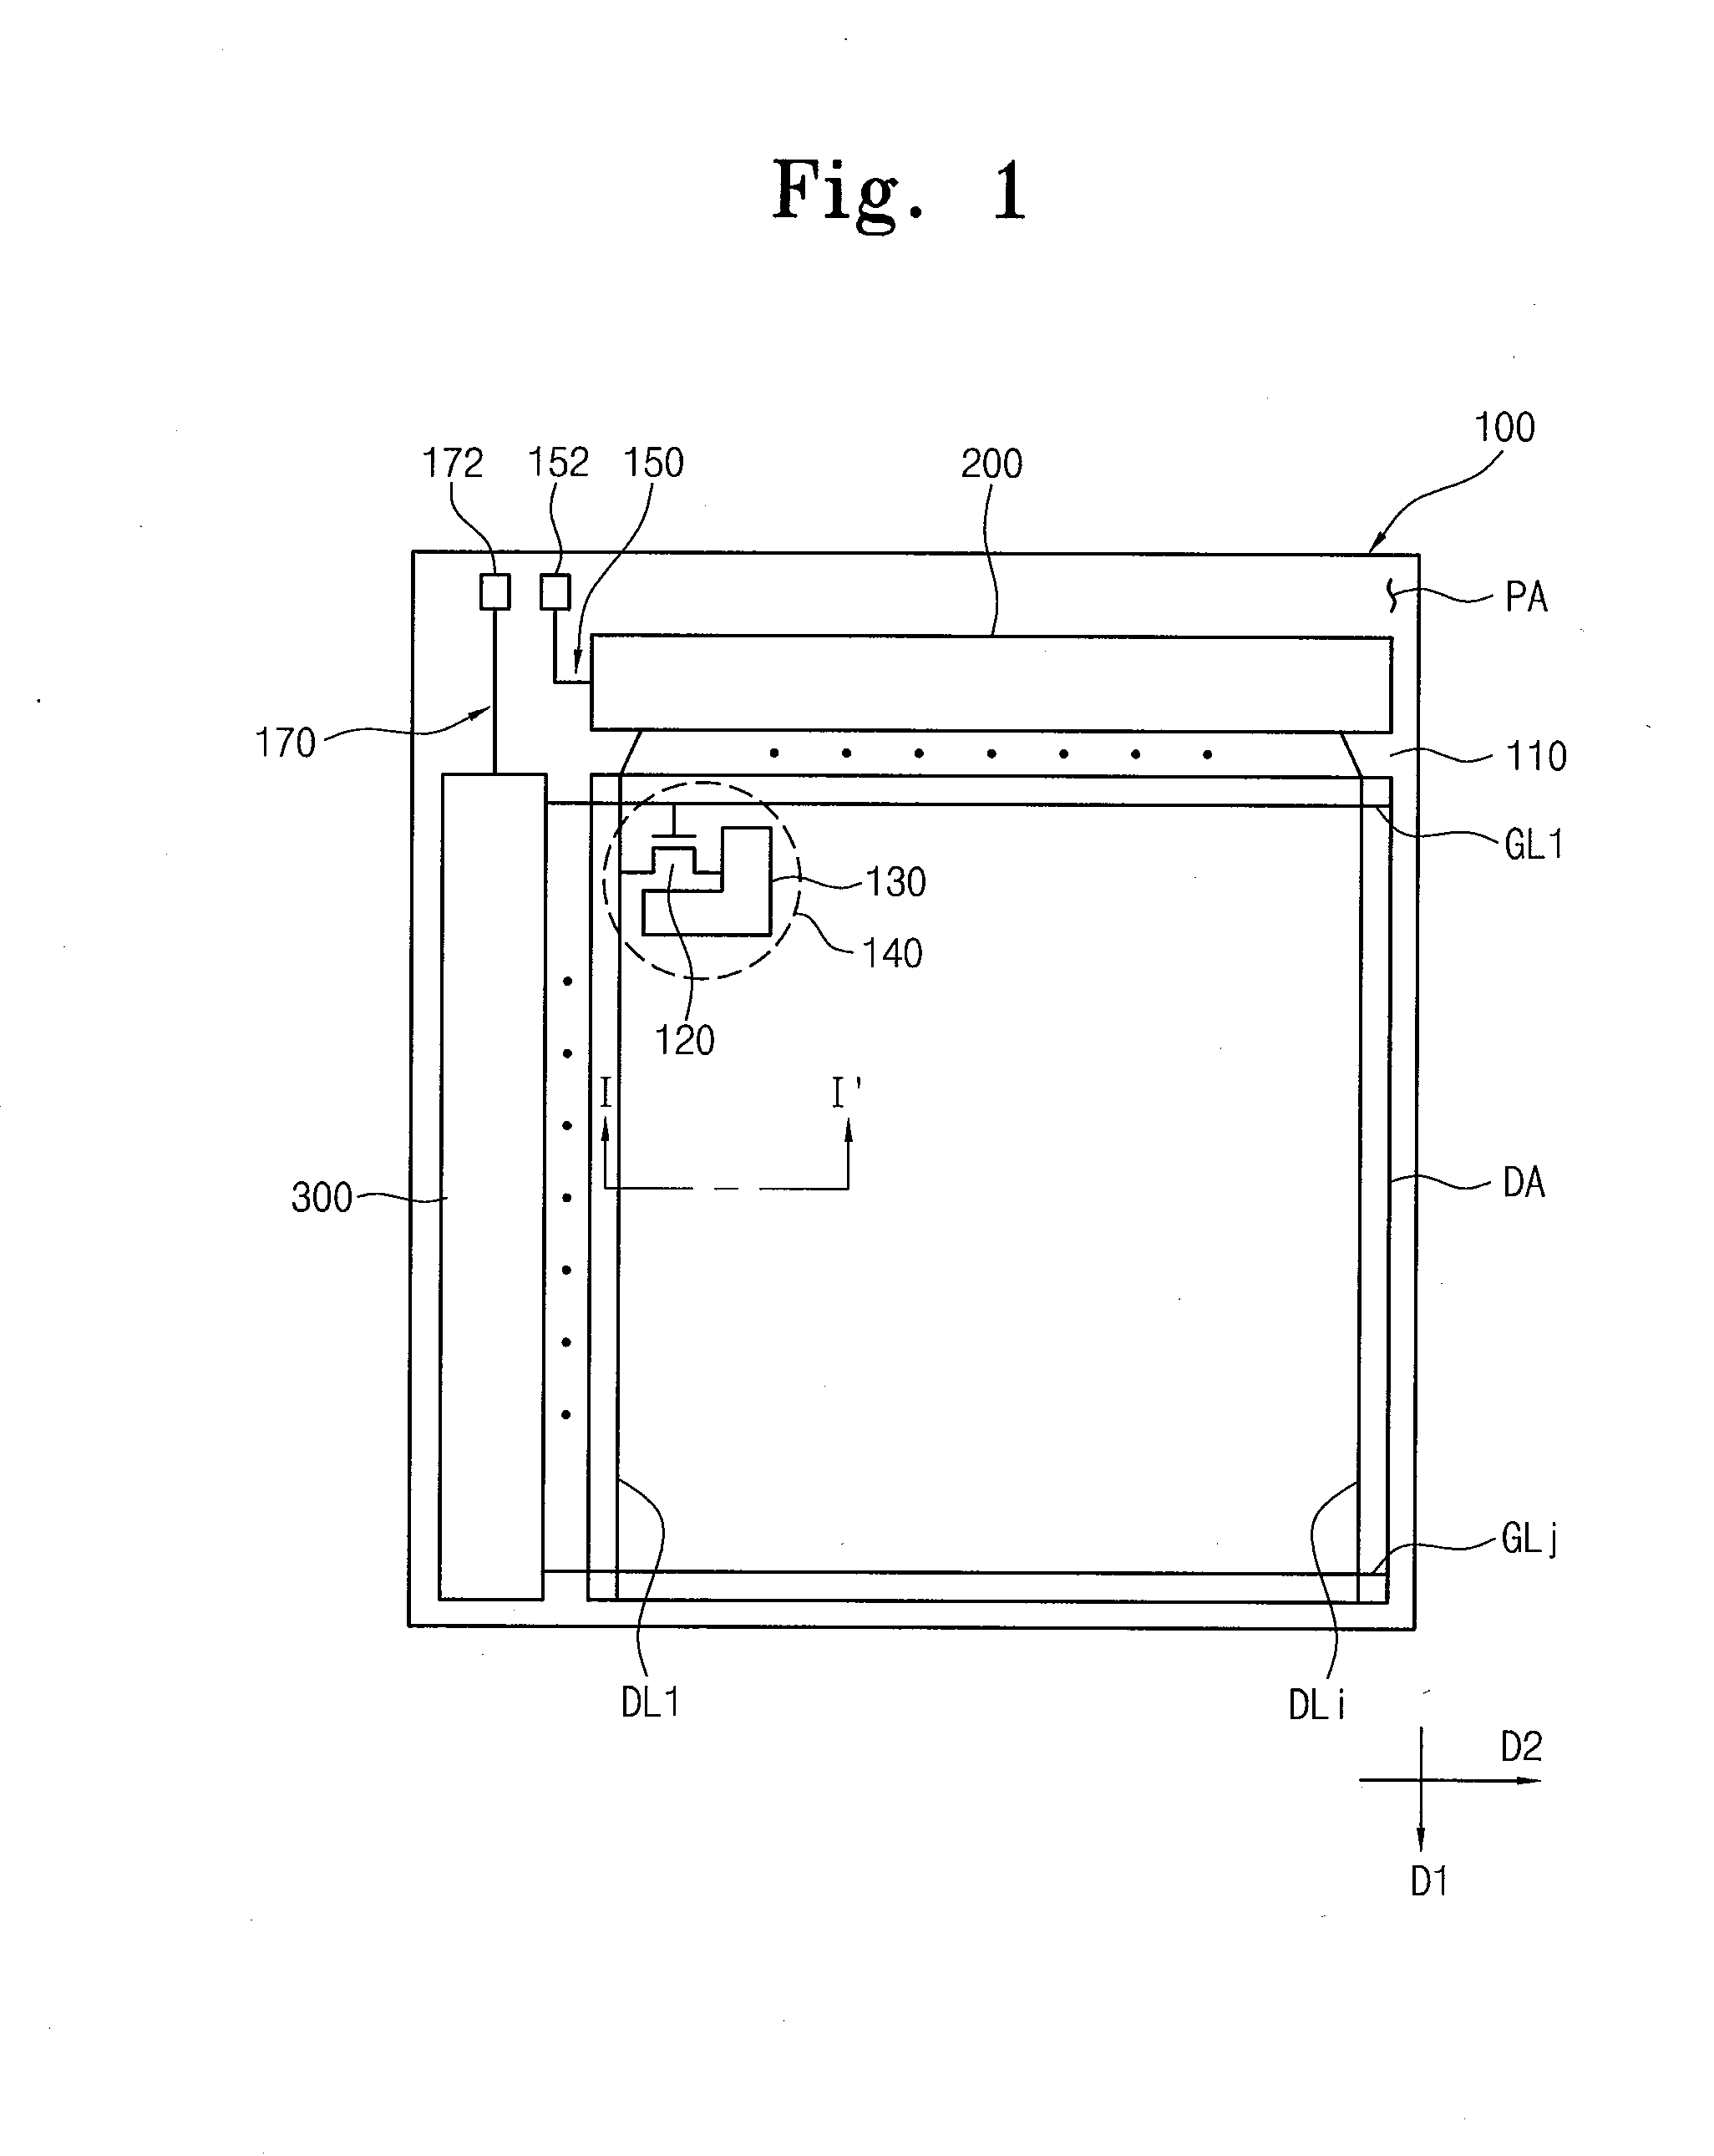 Array substrate for liquid crystal display and method of testing